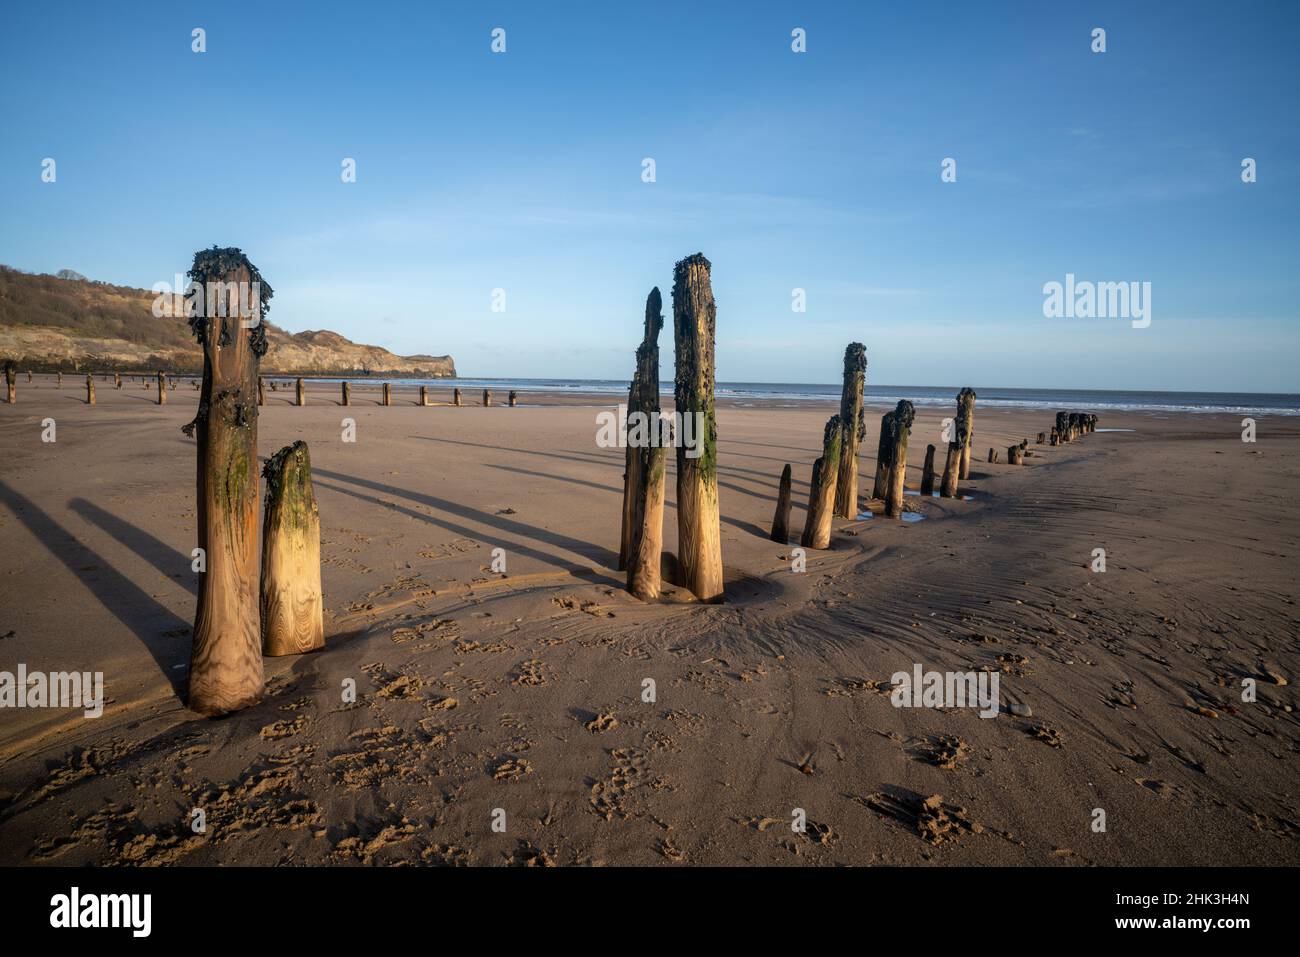 Old worn groynes or breakwaters on Sandsend beach in the early morning, North Yorkshire Stock Photo